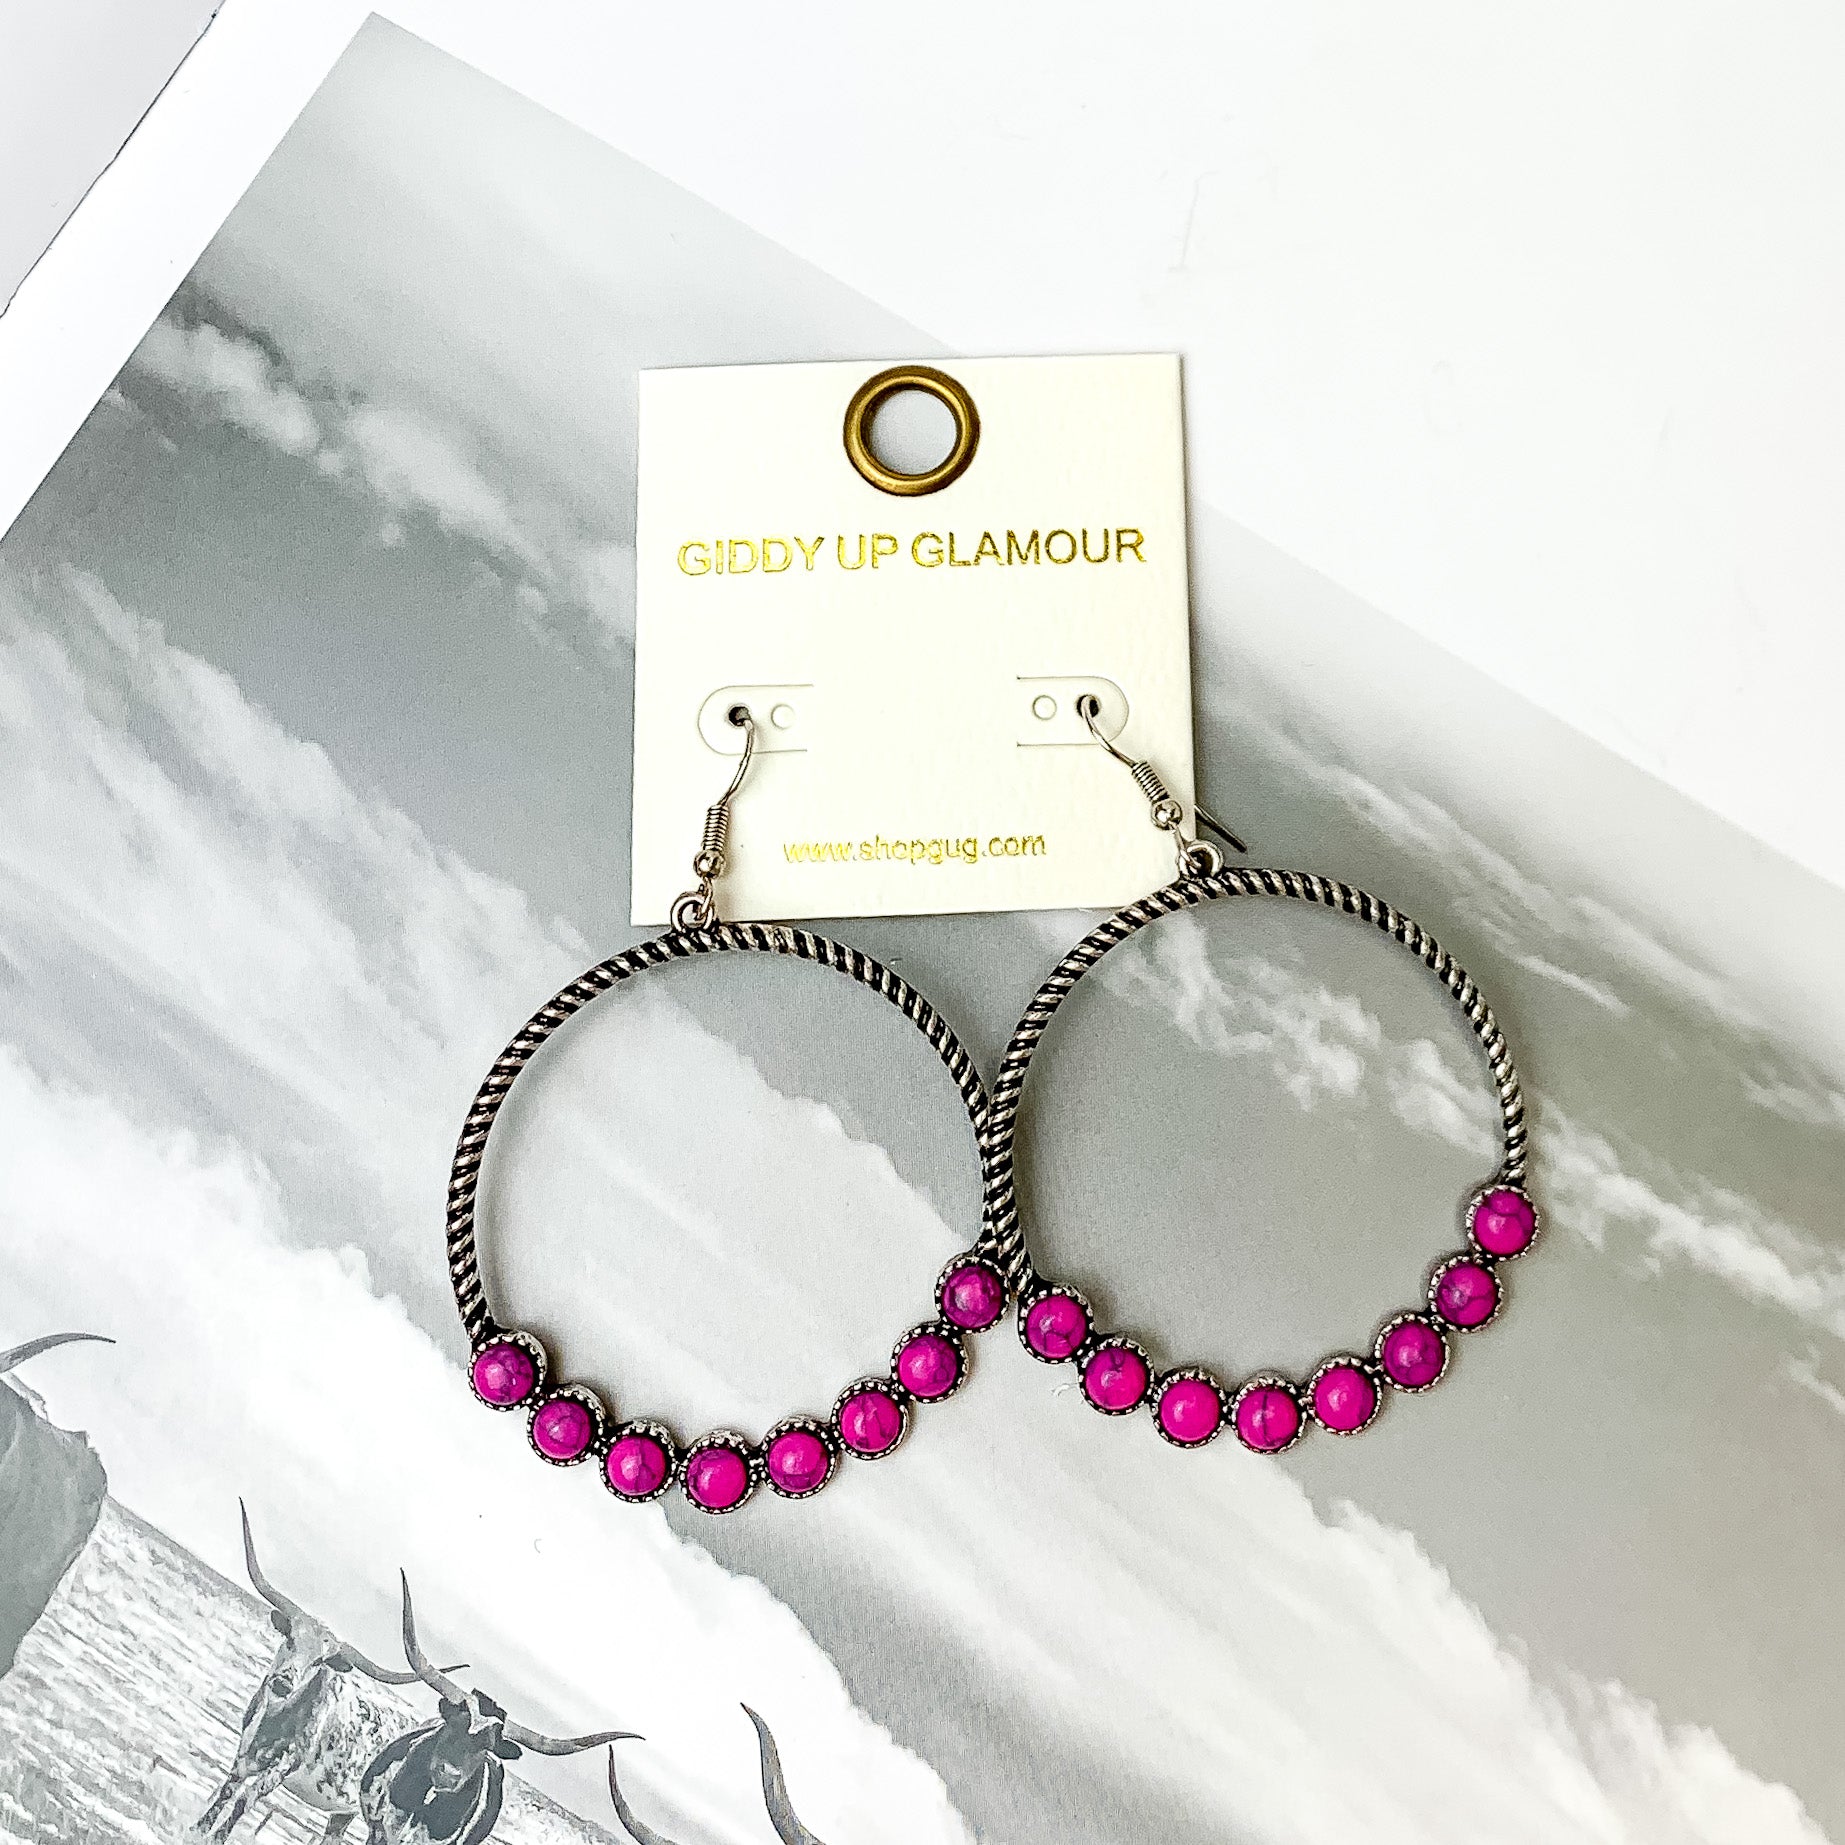 Forever Twisted Hoop Earrings with Stones in Pink. Pictured on a book with a western scene in the background.